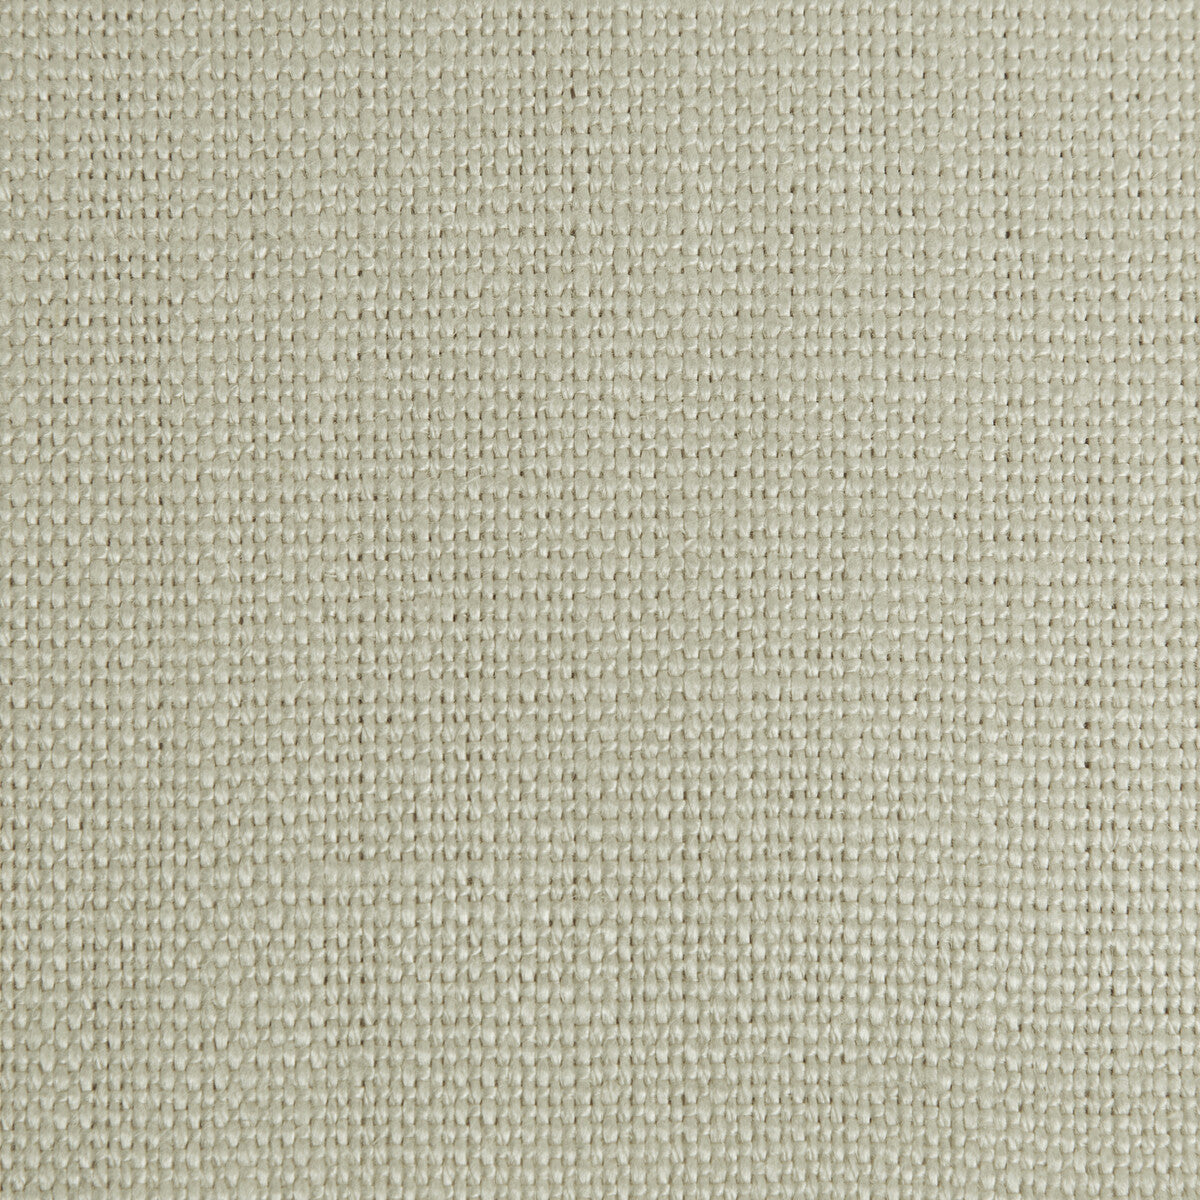 Hampton Linen fabric in silver color - pattern 2012171.2211.0 - by Lee Jofa in the Colour Complements II collection